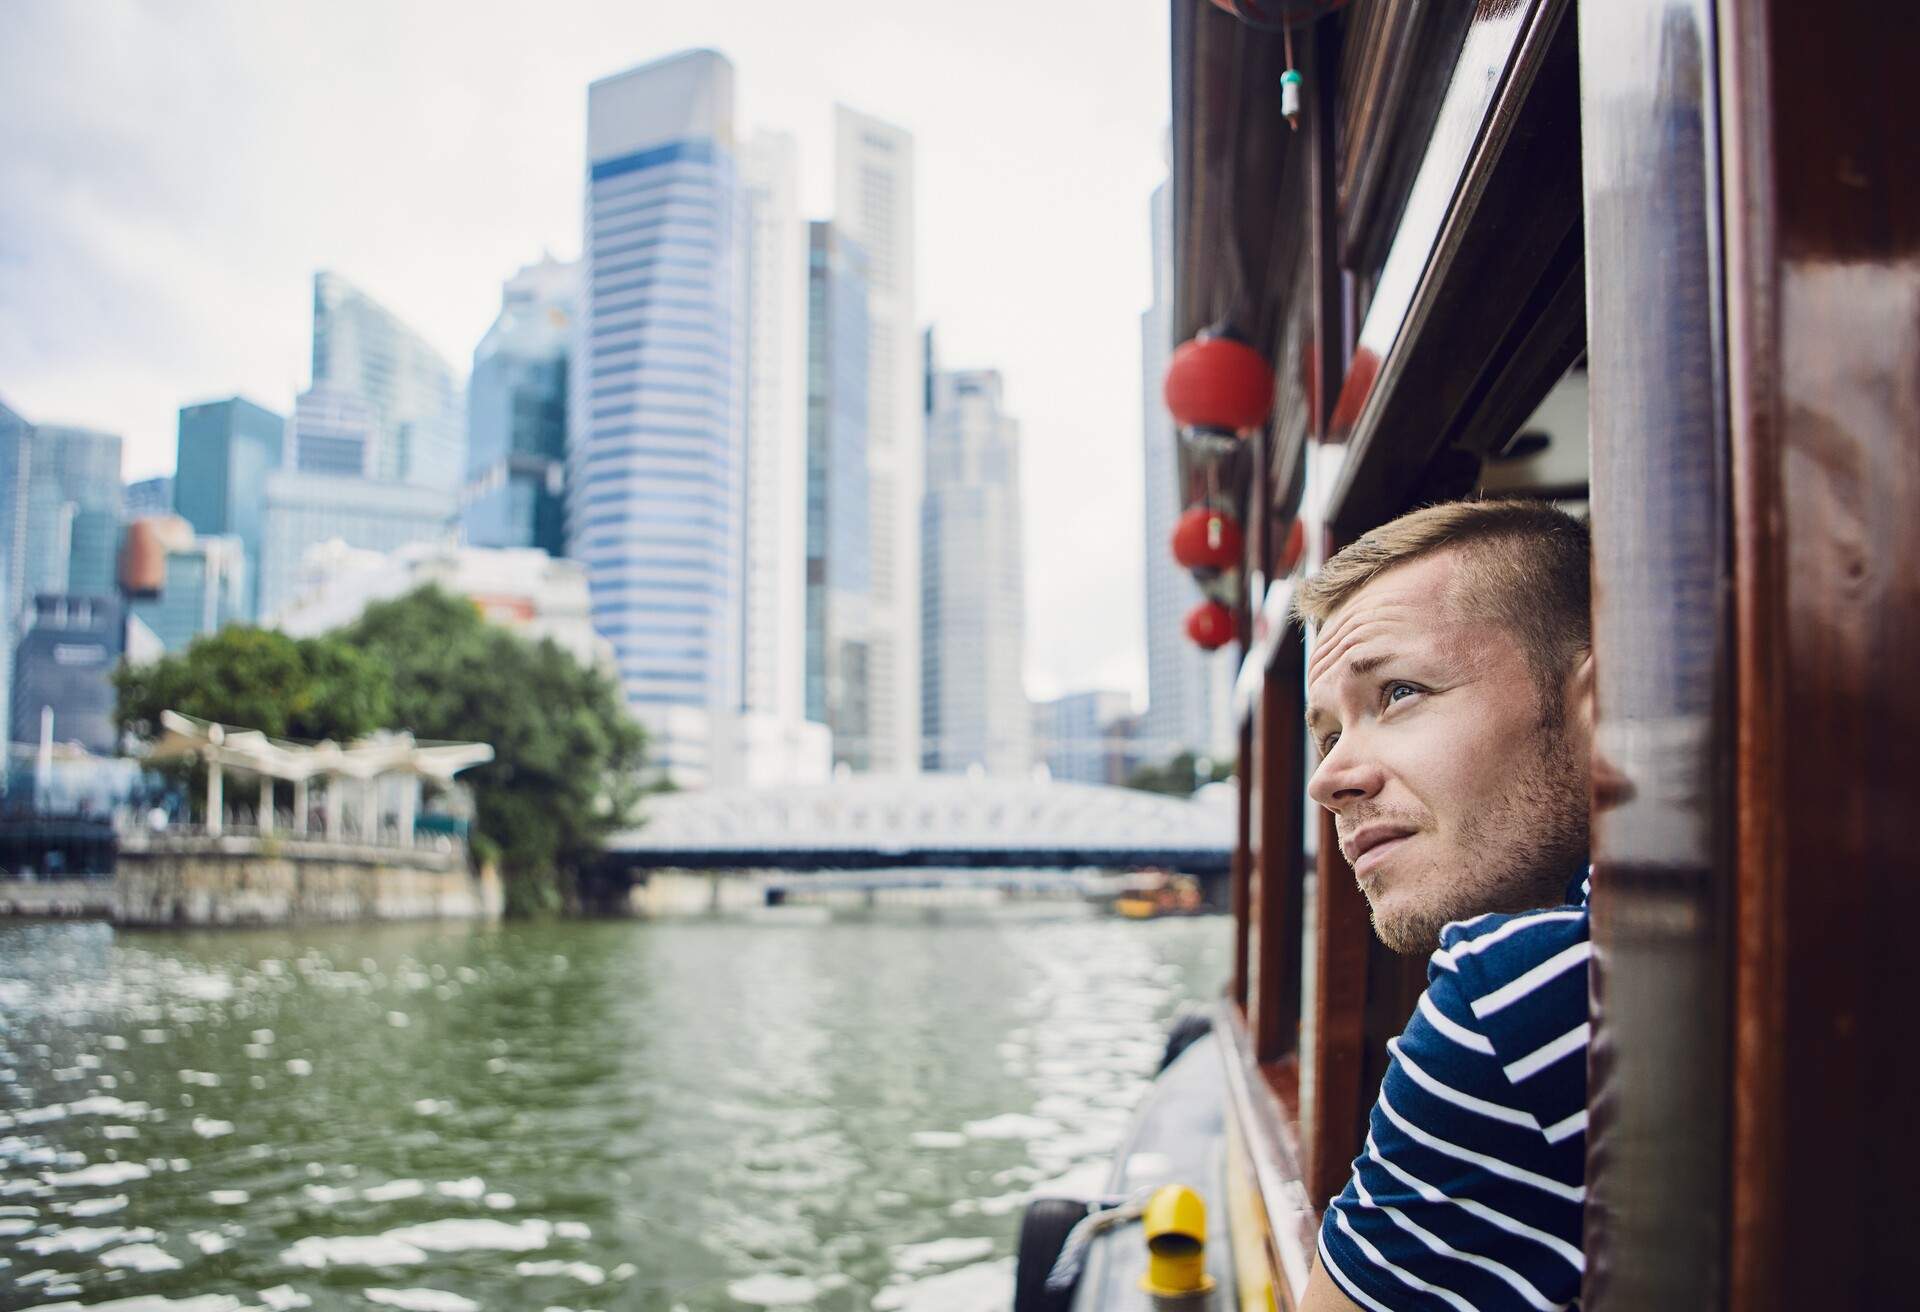 Man looking out ferry window in Singapore